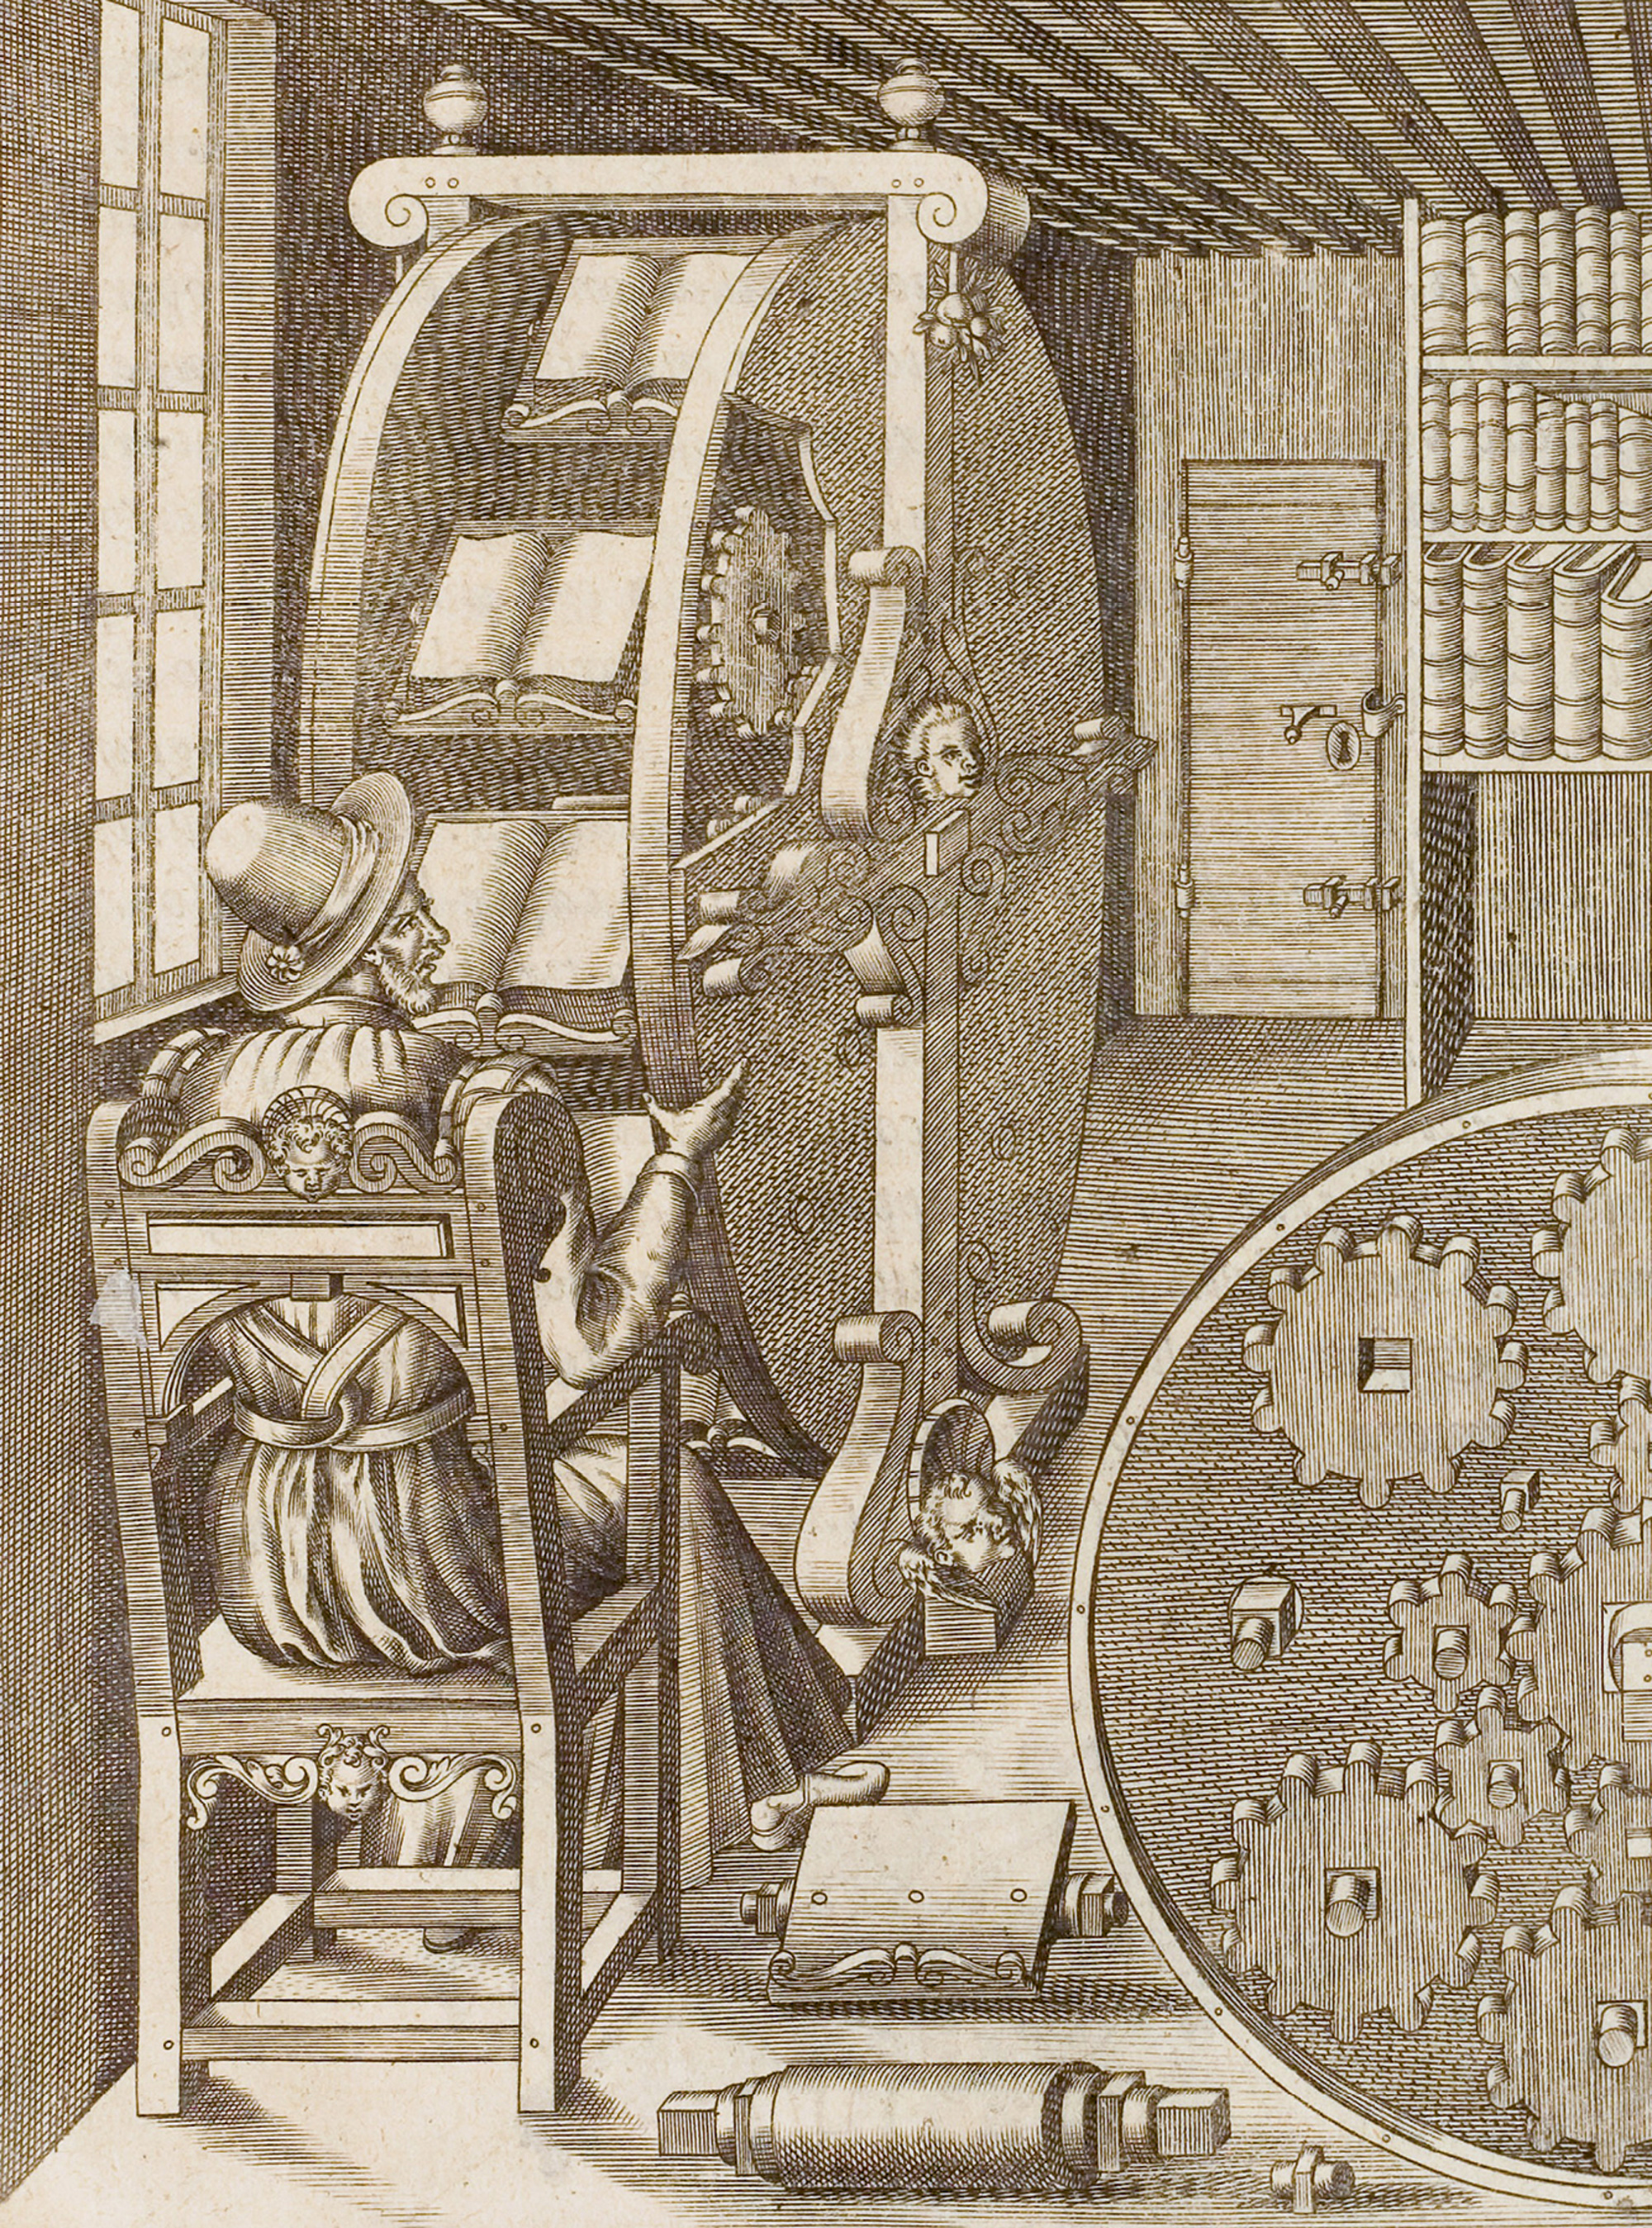 An illustration of the Ramelli wheel from Agostino Ramelli’s fifteen eighty-eight treatise titled “Le diverse et artificiose machine.”